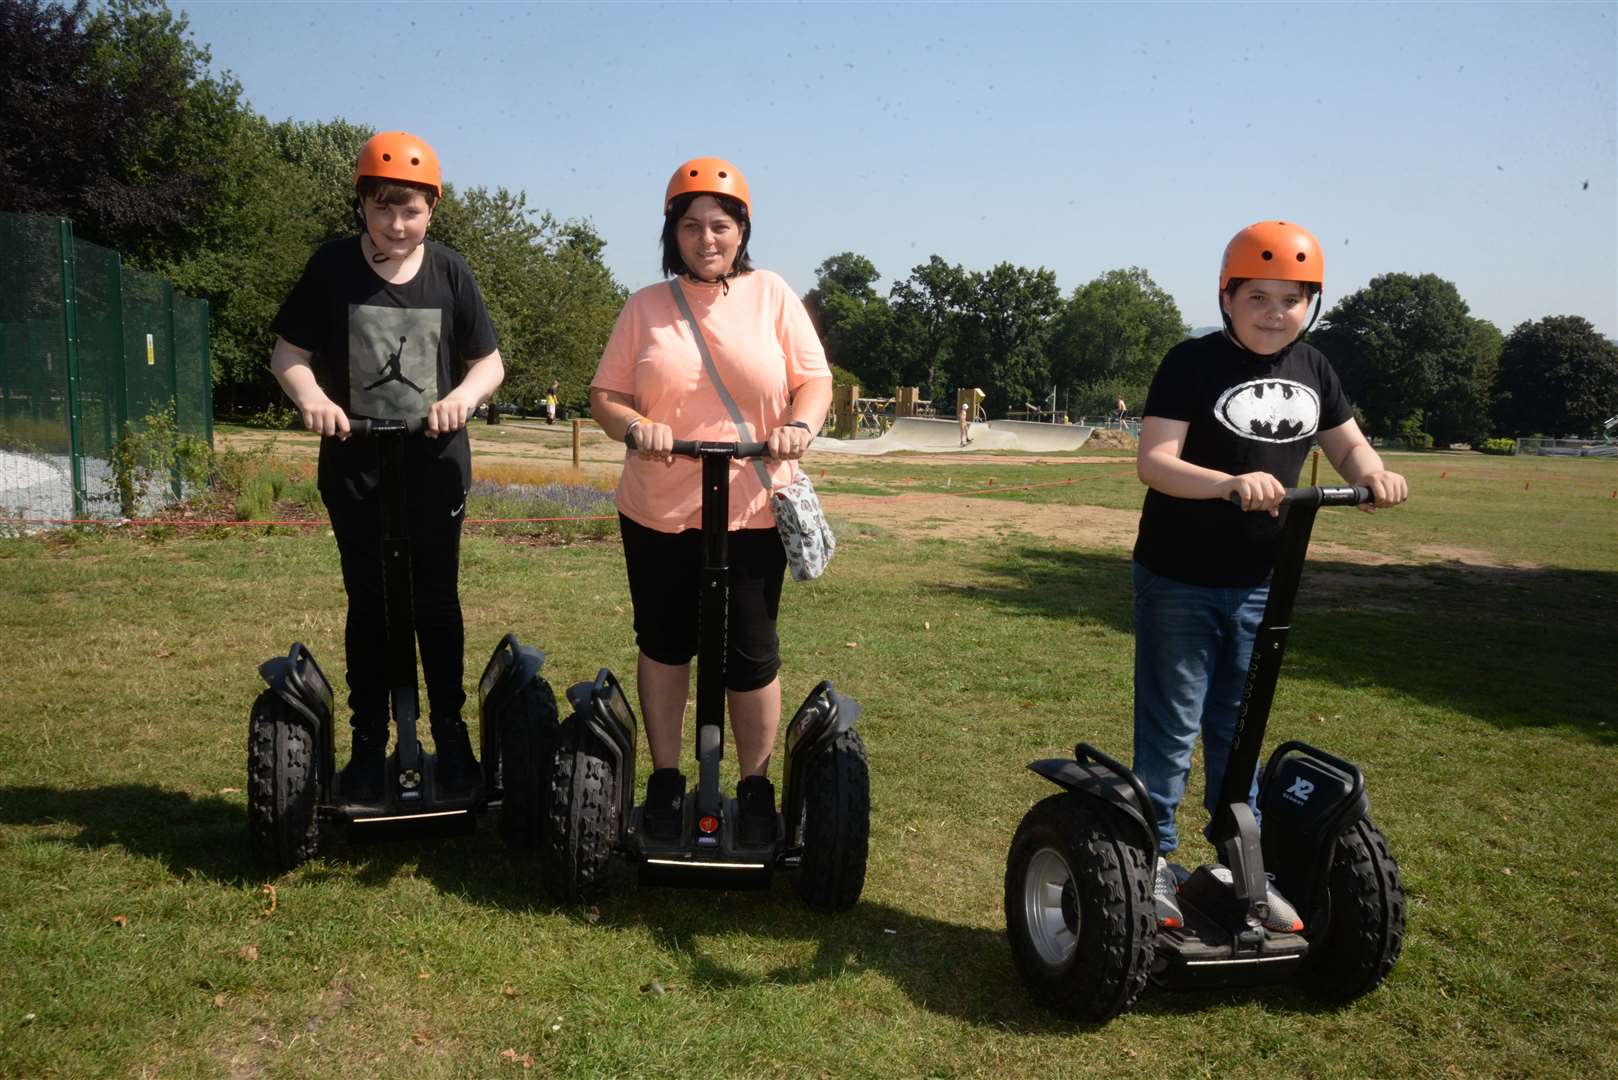 There are lots of new attractions at Mote Park including Segways, new play areas, crazy golf and climbing